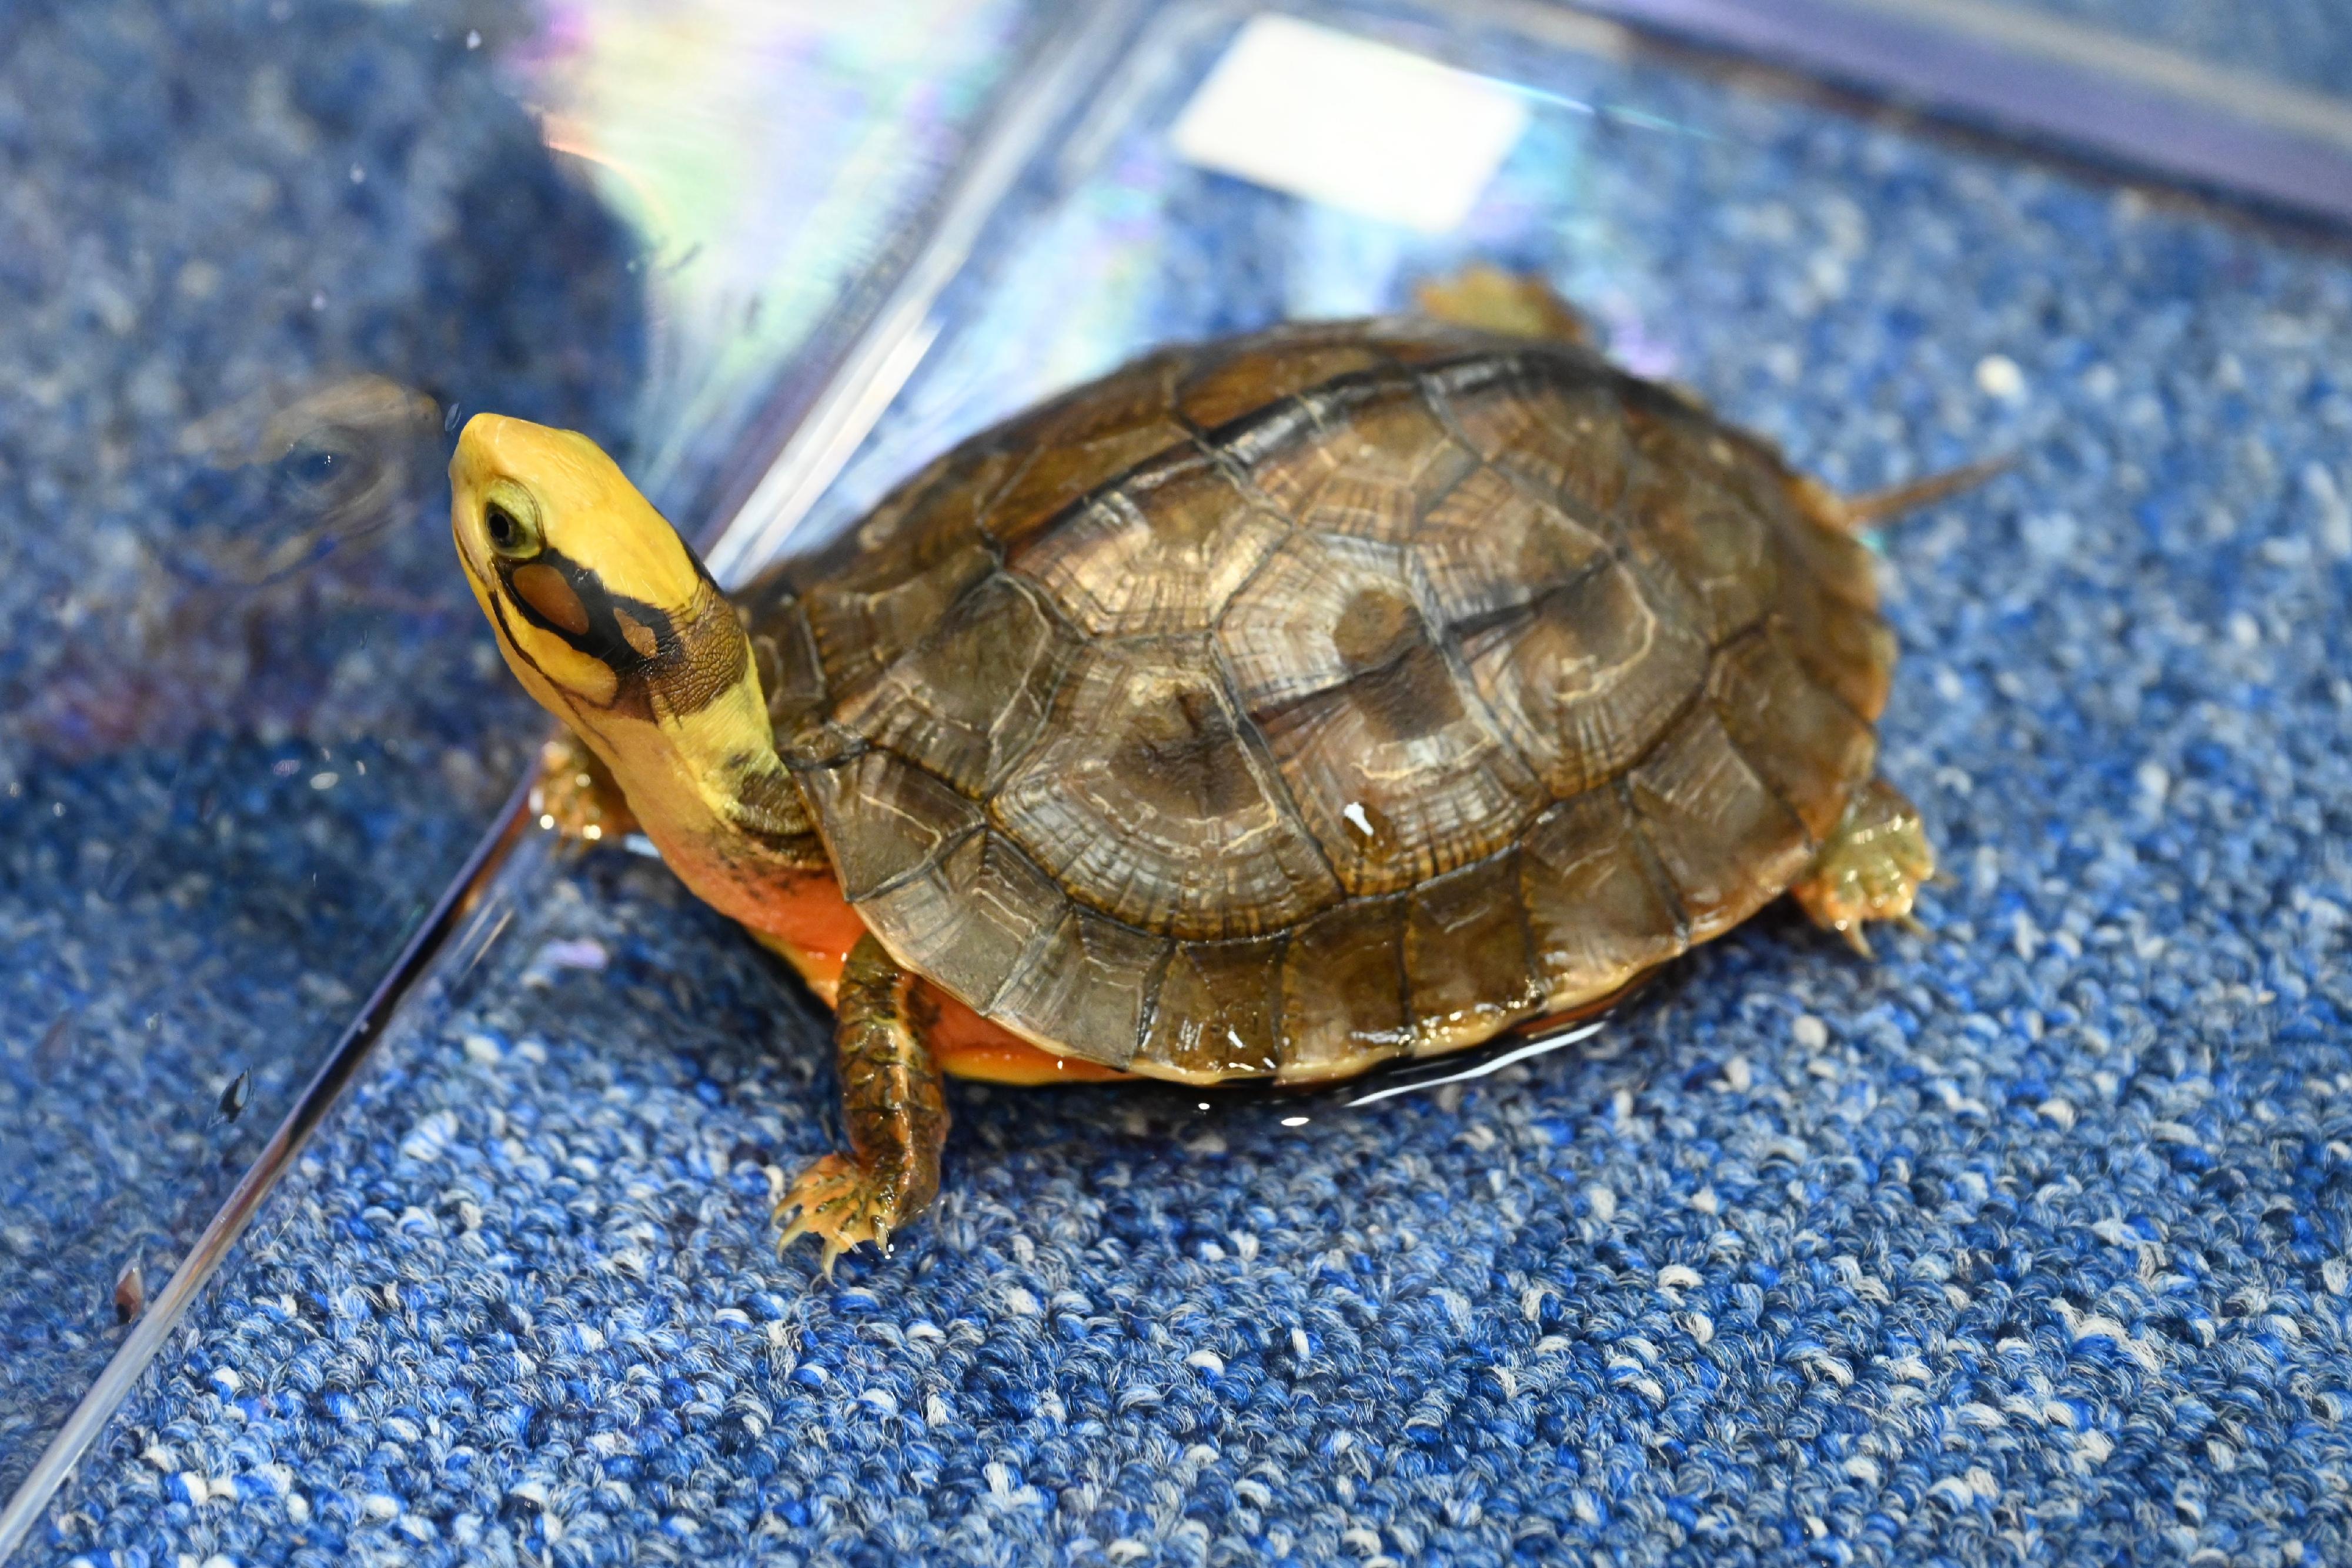 The Agriculture, Fisheries and Conservation Department conducted a joint operation with the Hong Kong Police Force on May 17 on a case of suspected illegal possession of endangered species. Thirty-one specimens of turtles suspected of being illegally possessed were seized on a premises. Photo shows a Chinese three-striped box turtle (also commonly known as golden coin turtle) (Cuora trifasciata), which is listed on Appendix II to the Convention on International Trade in Endangered Species of Wild Fauna and Flora, seized by the officers.